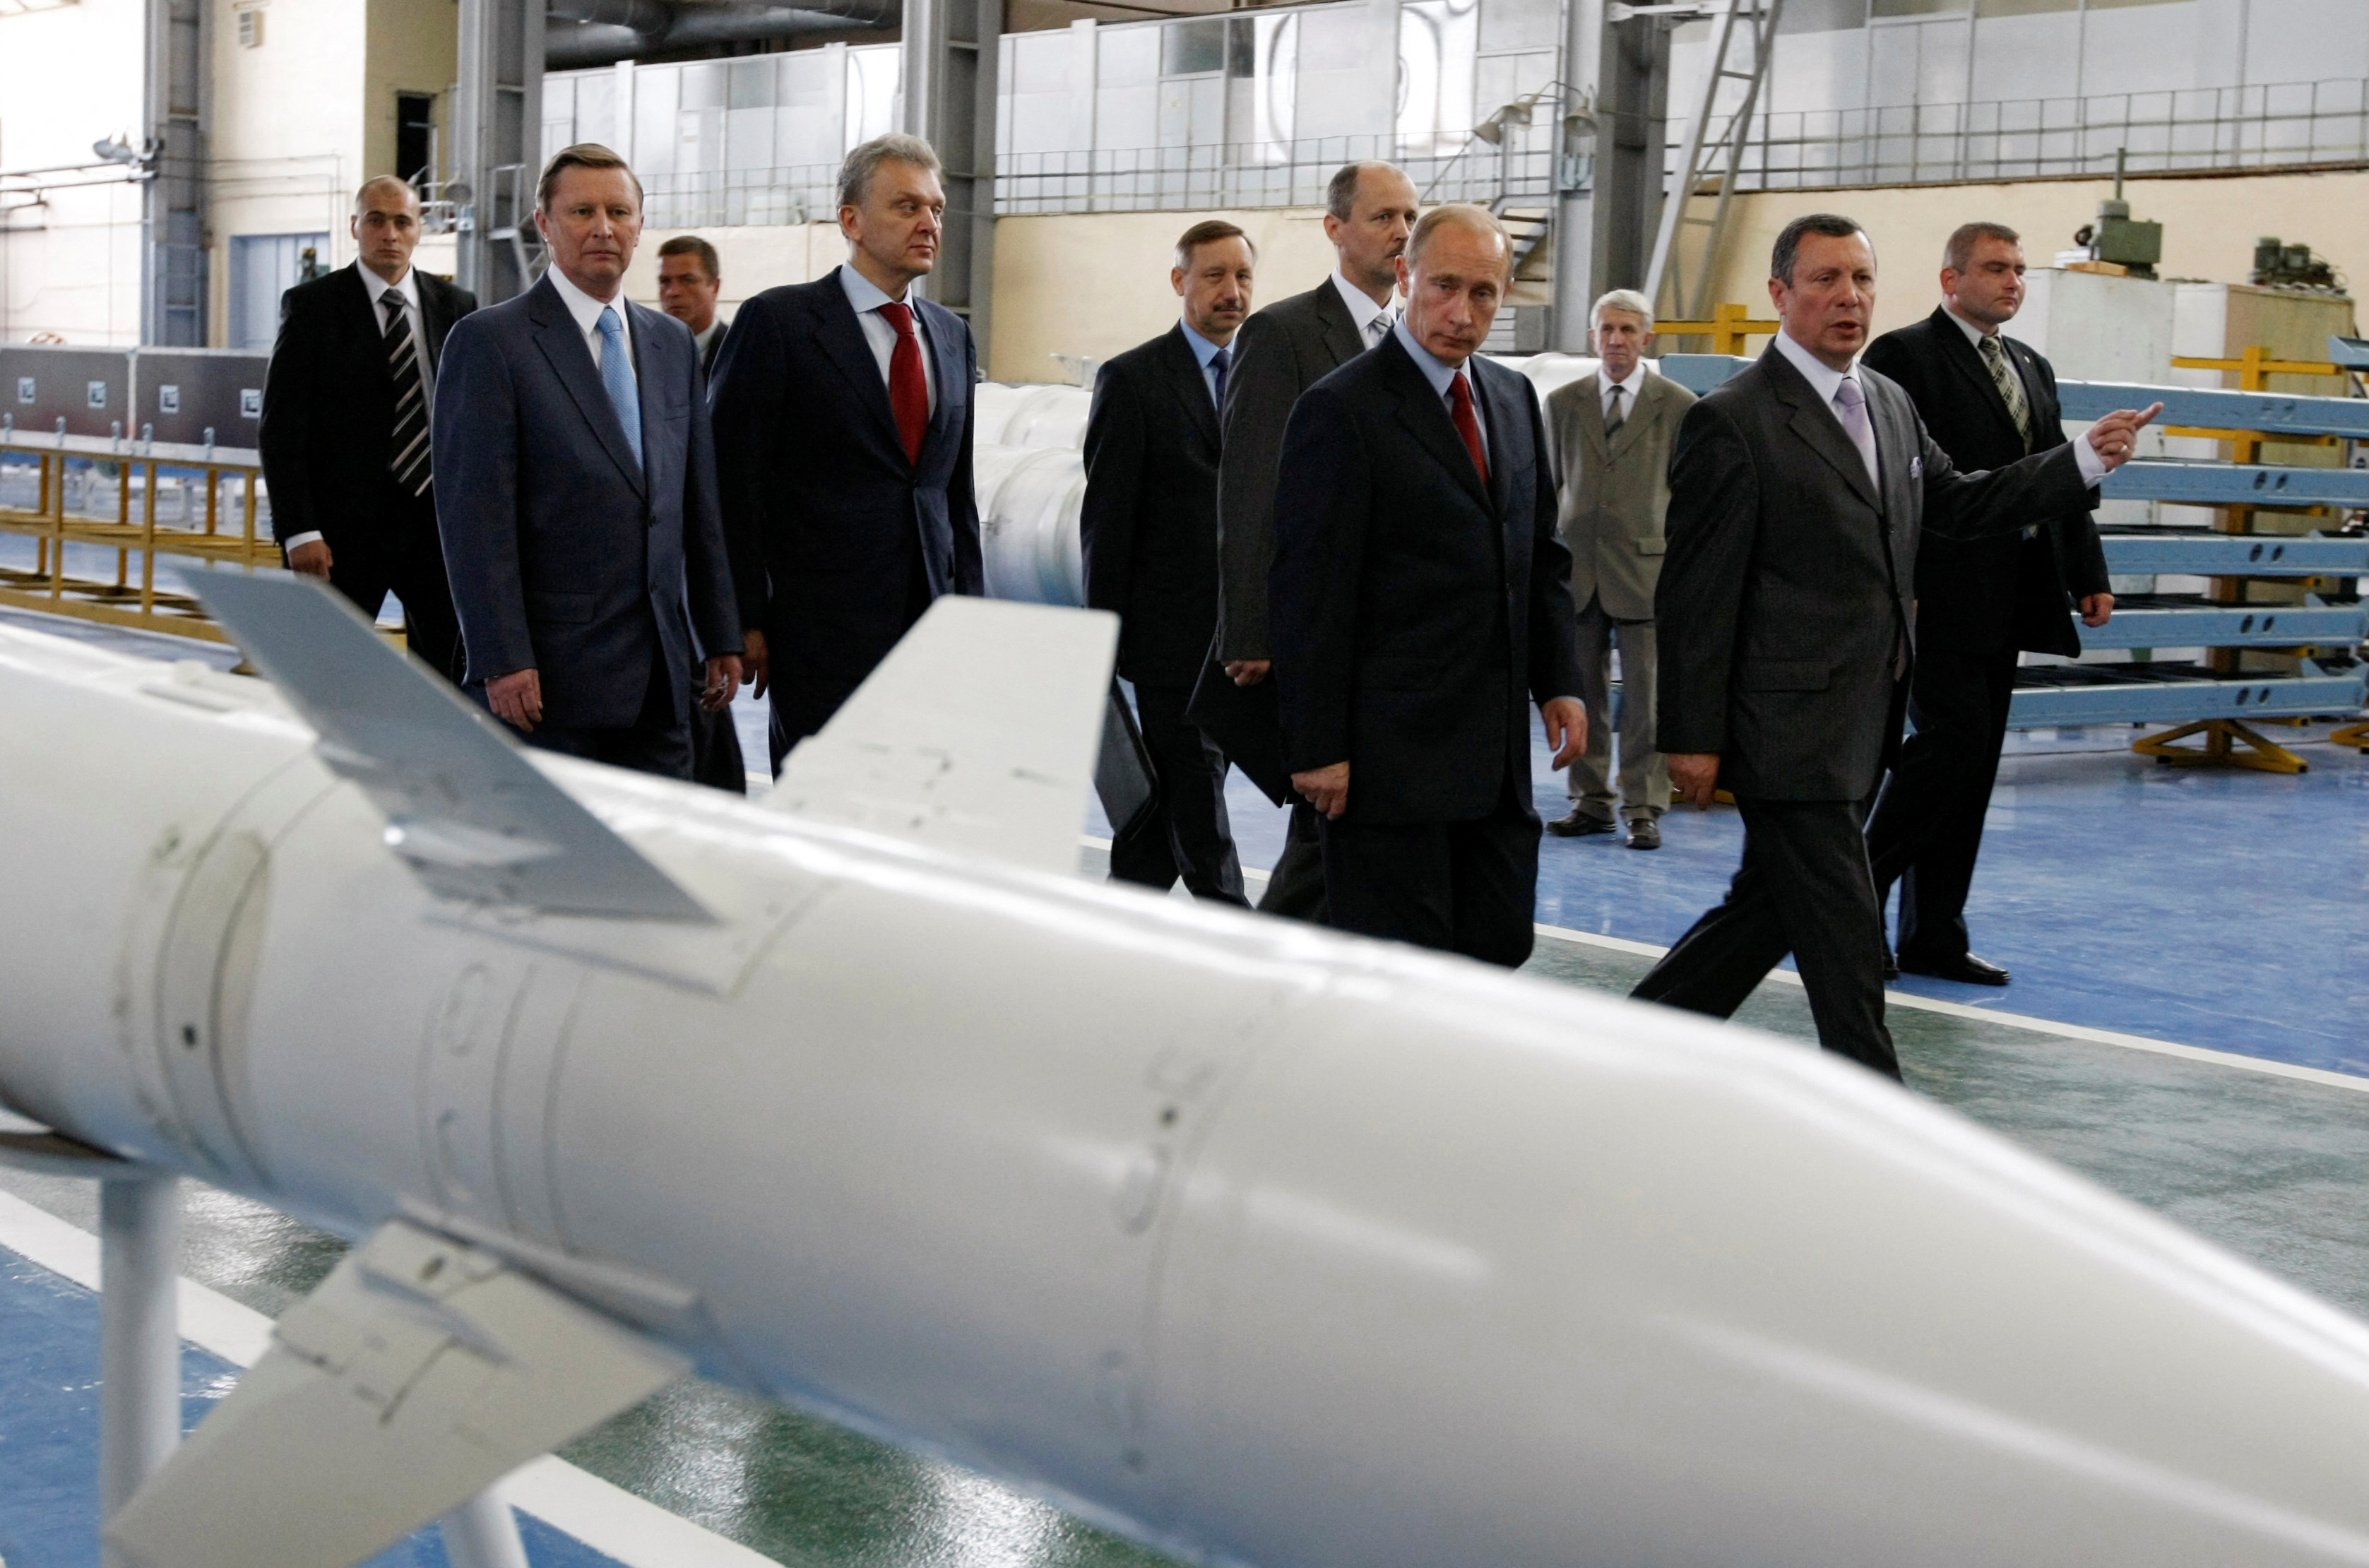 FILE PHOTO: Russian Deputy Prime Minister Sergei Ivanov (2nd L), Industry and Trade Minister Viktor Khristenko (4th L) and Prime Minister Vladimir Putin (4th R) visit the Almaz-Antey Air Defense plant in Moscow July 28, 2008.     REUTERS/RIA Novosti